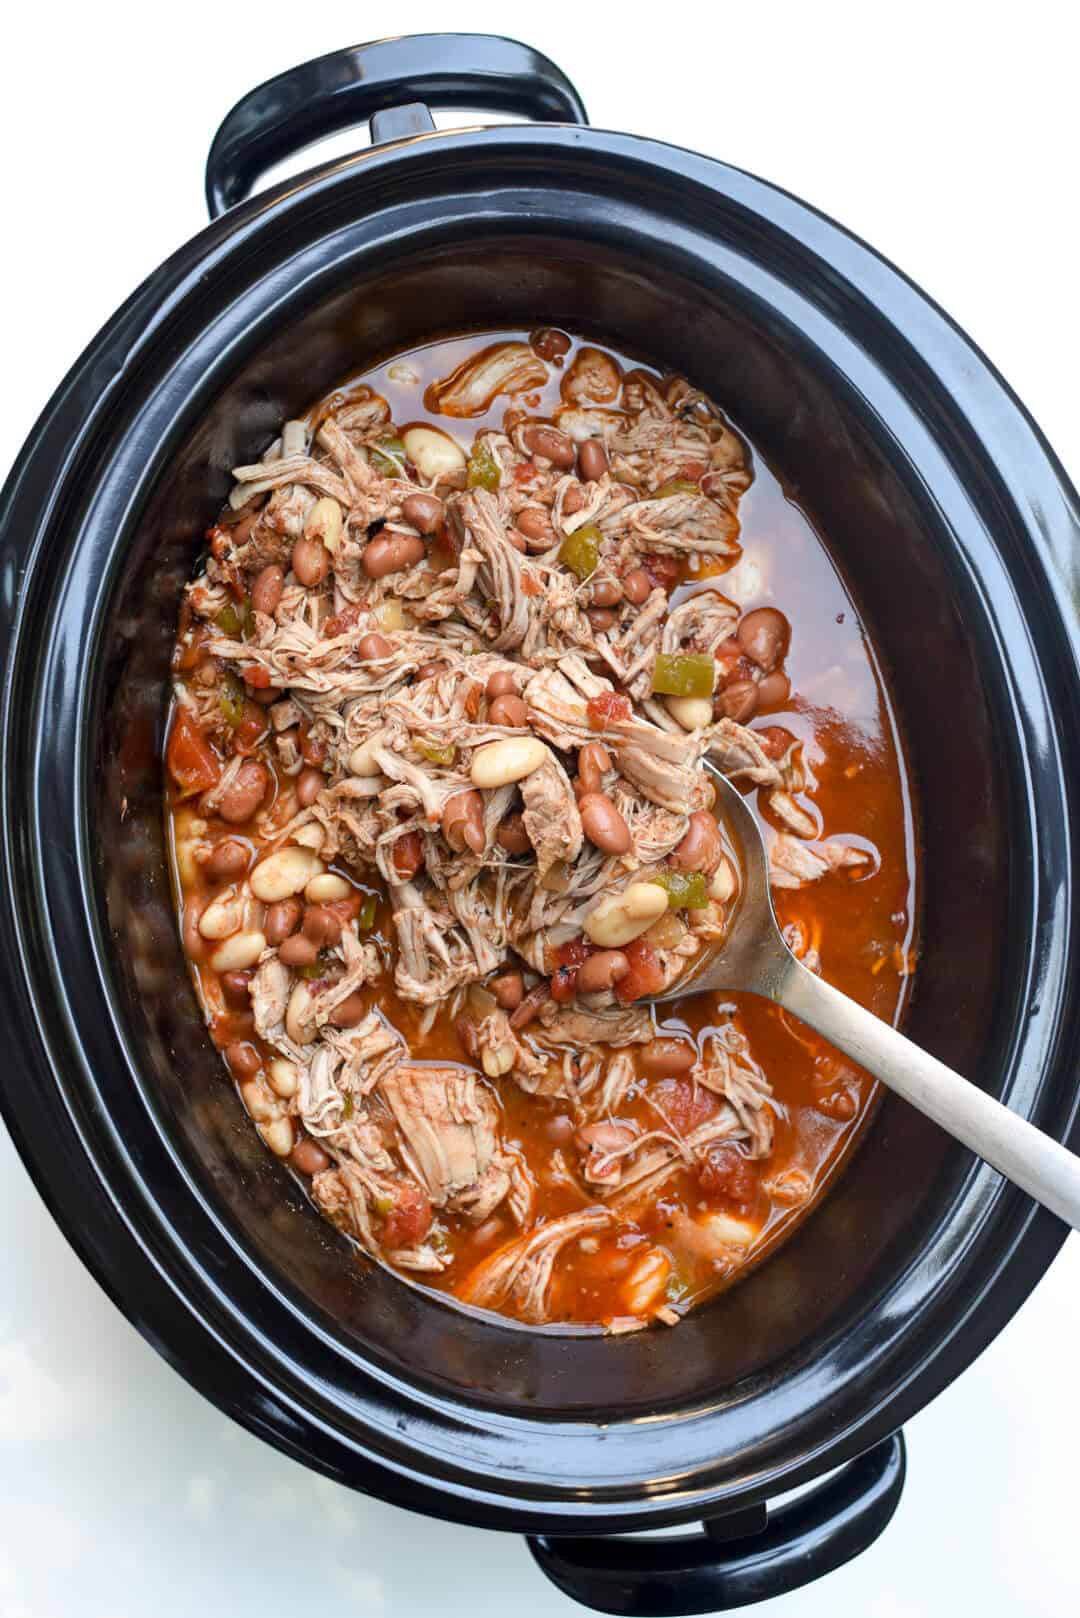 A top down shot of a slow cooker filled with cooked shredded pork and beans.